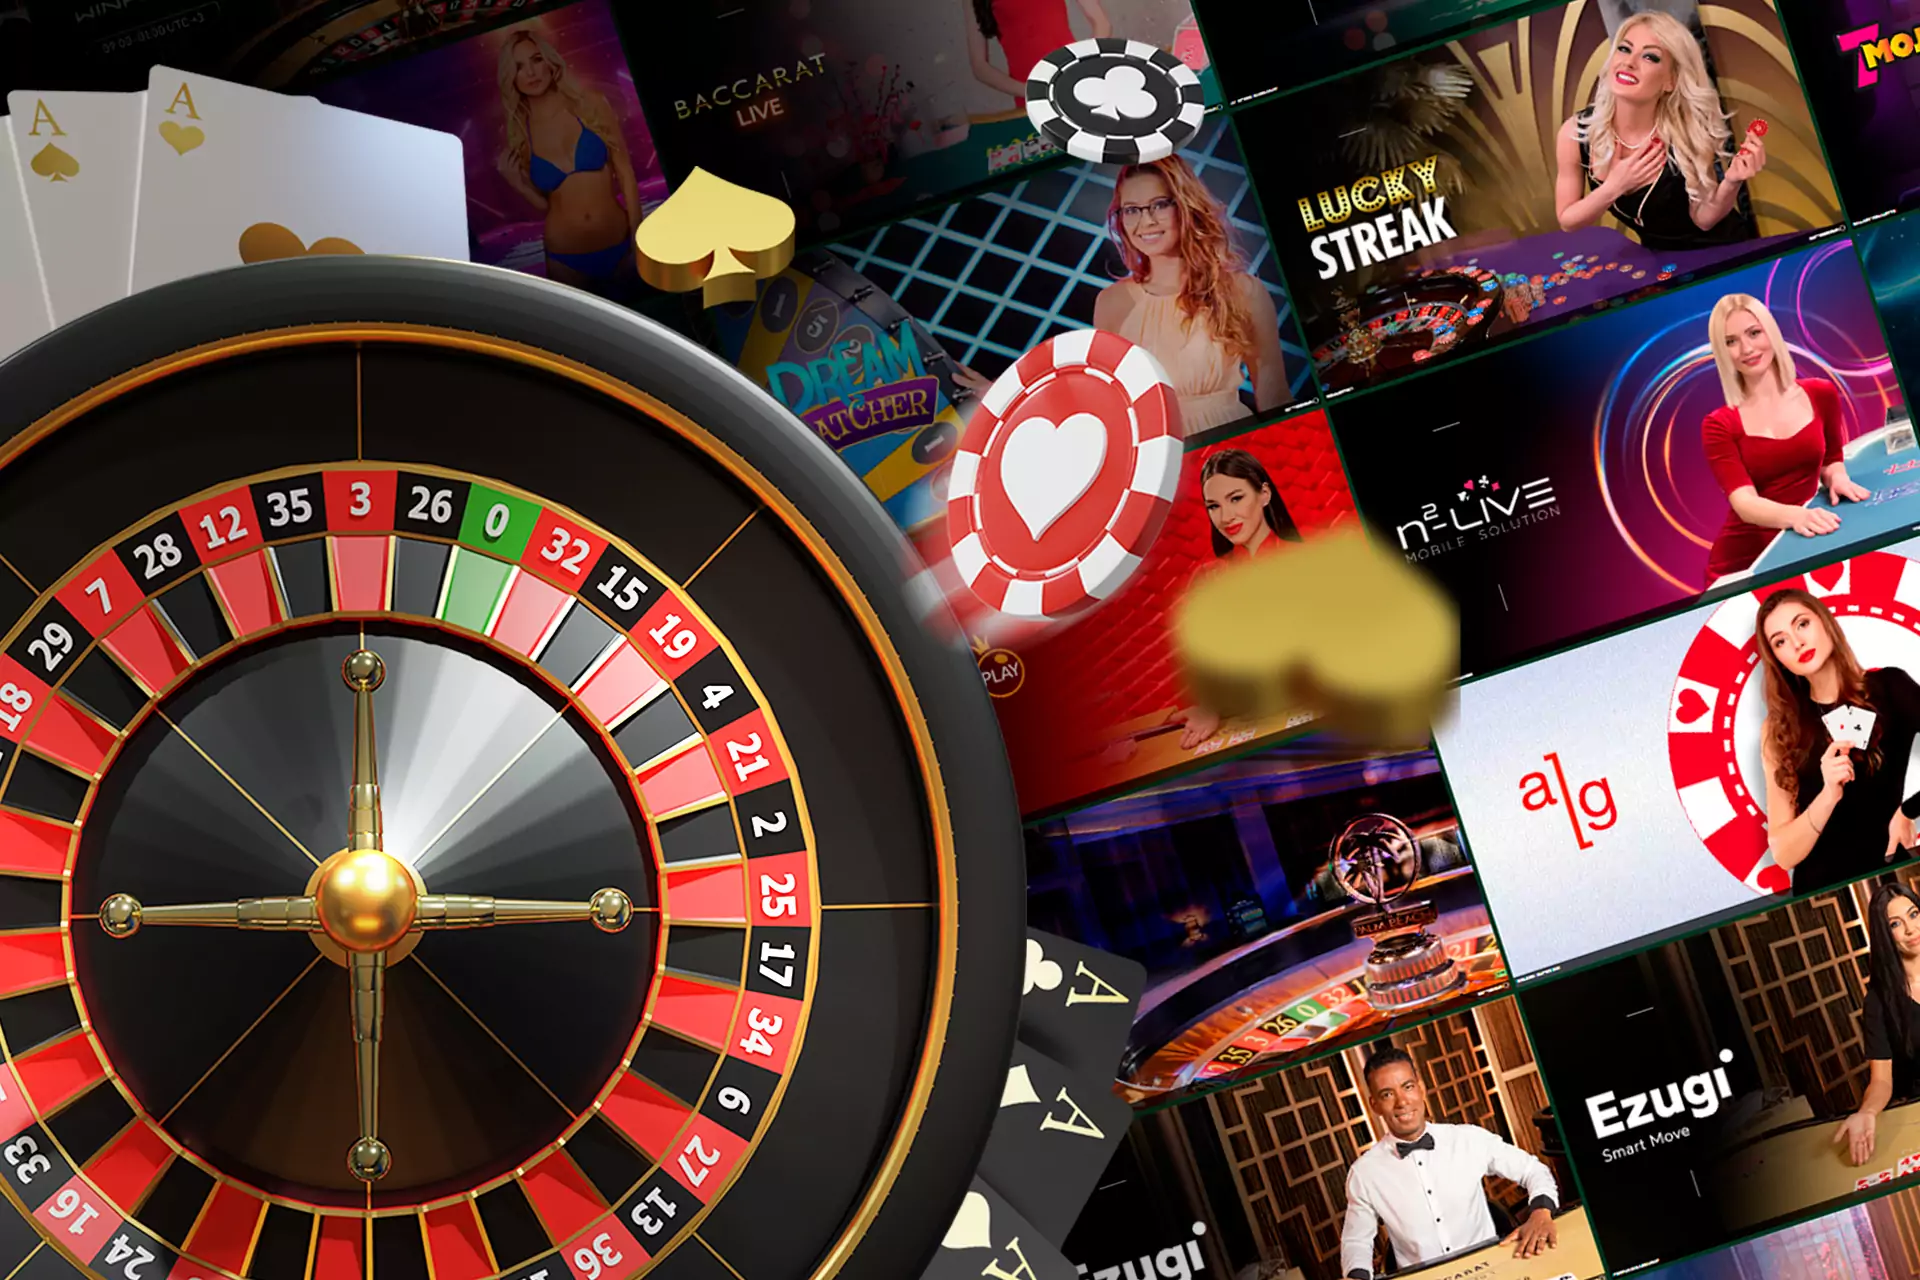 In the Casino section, there are lots of games available to play anytime.